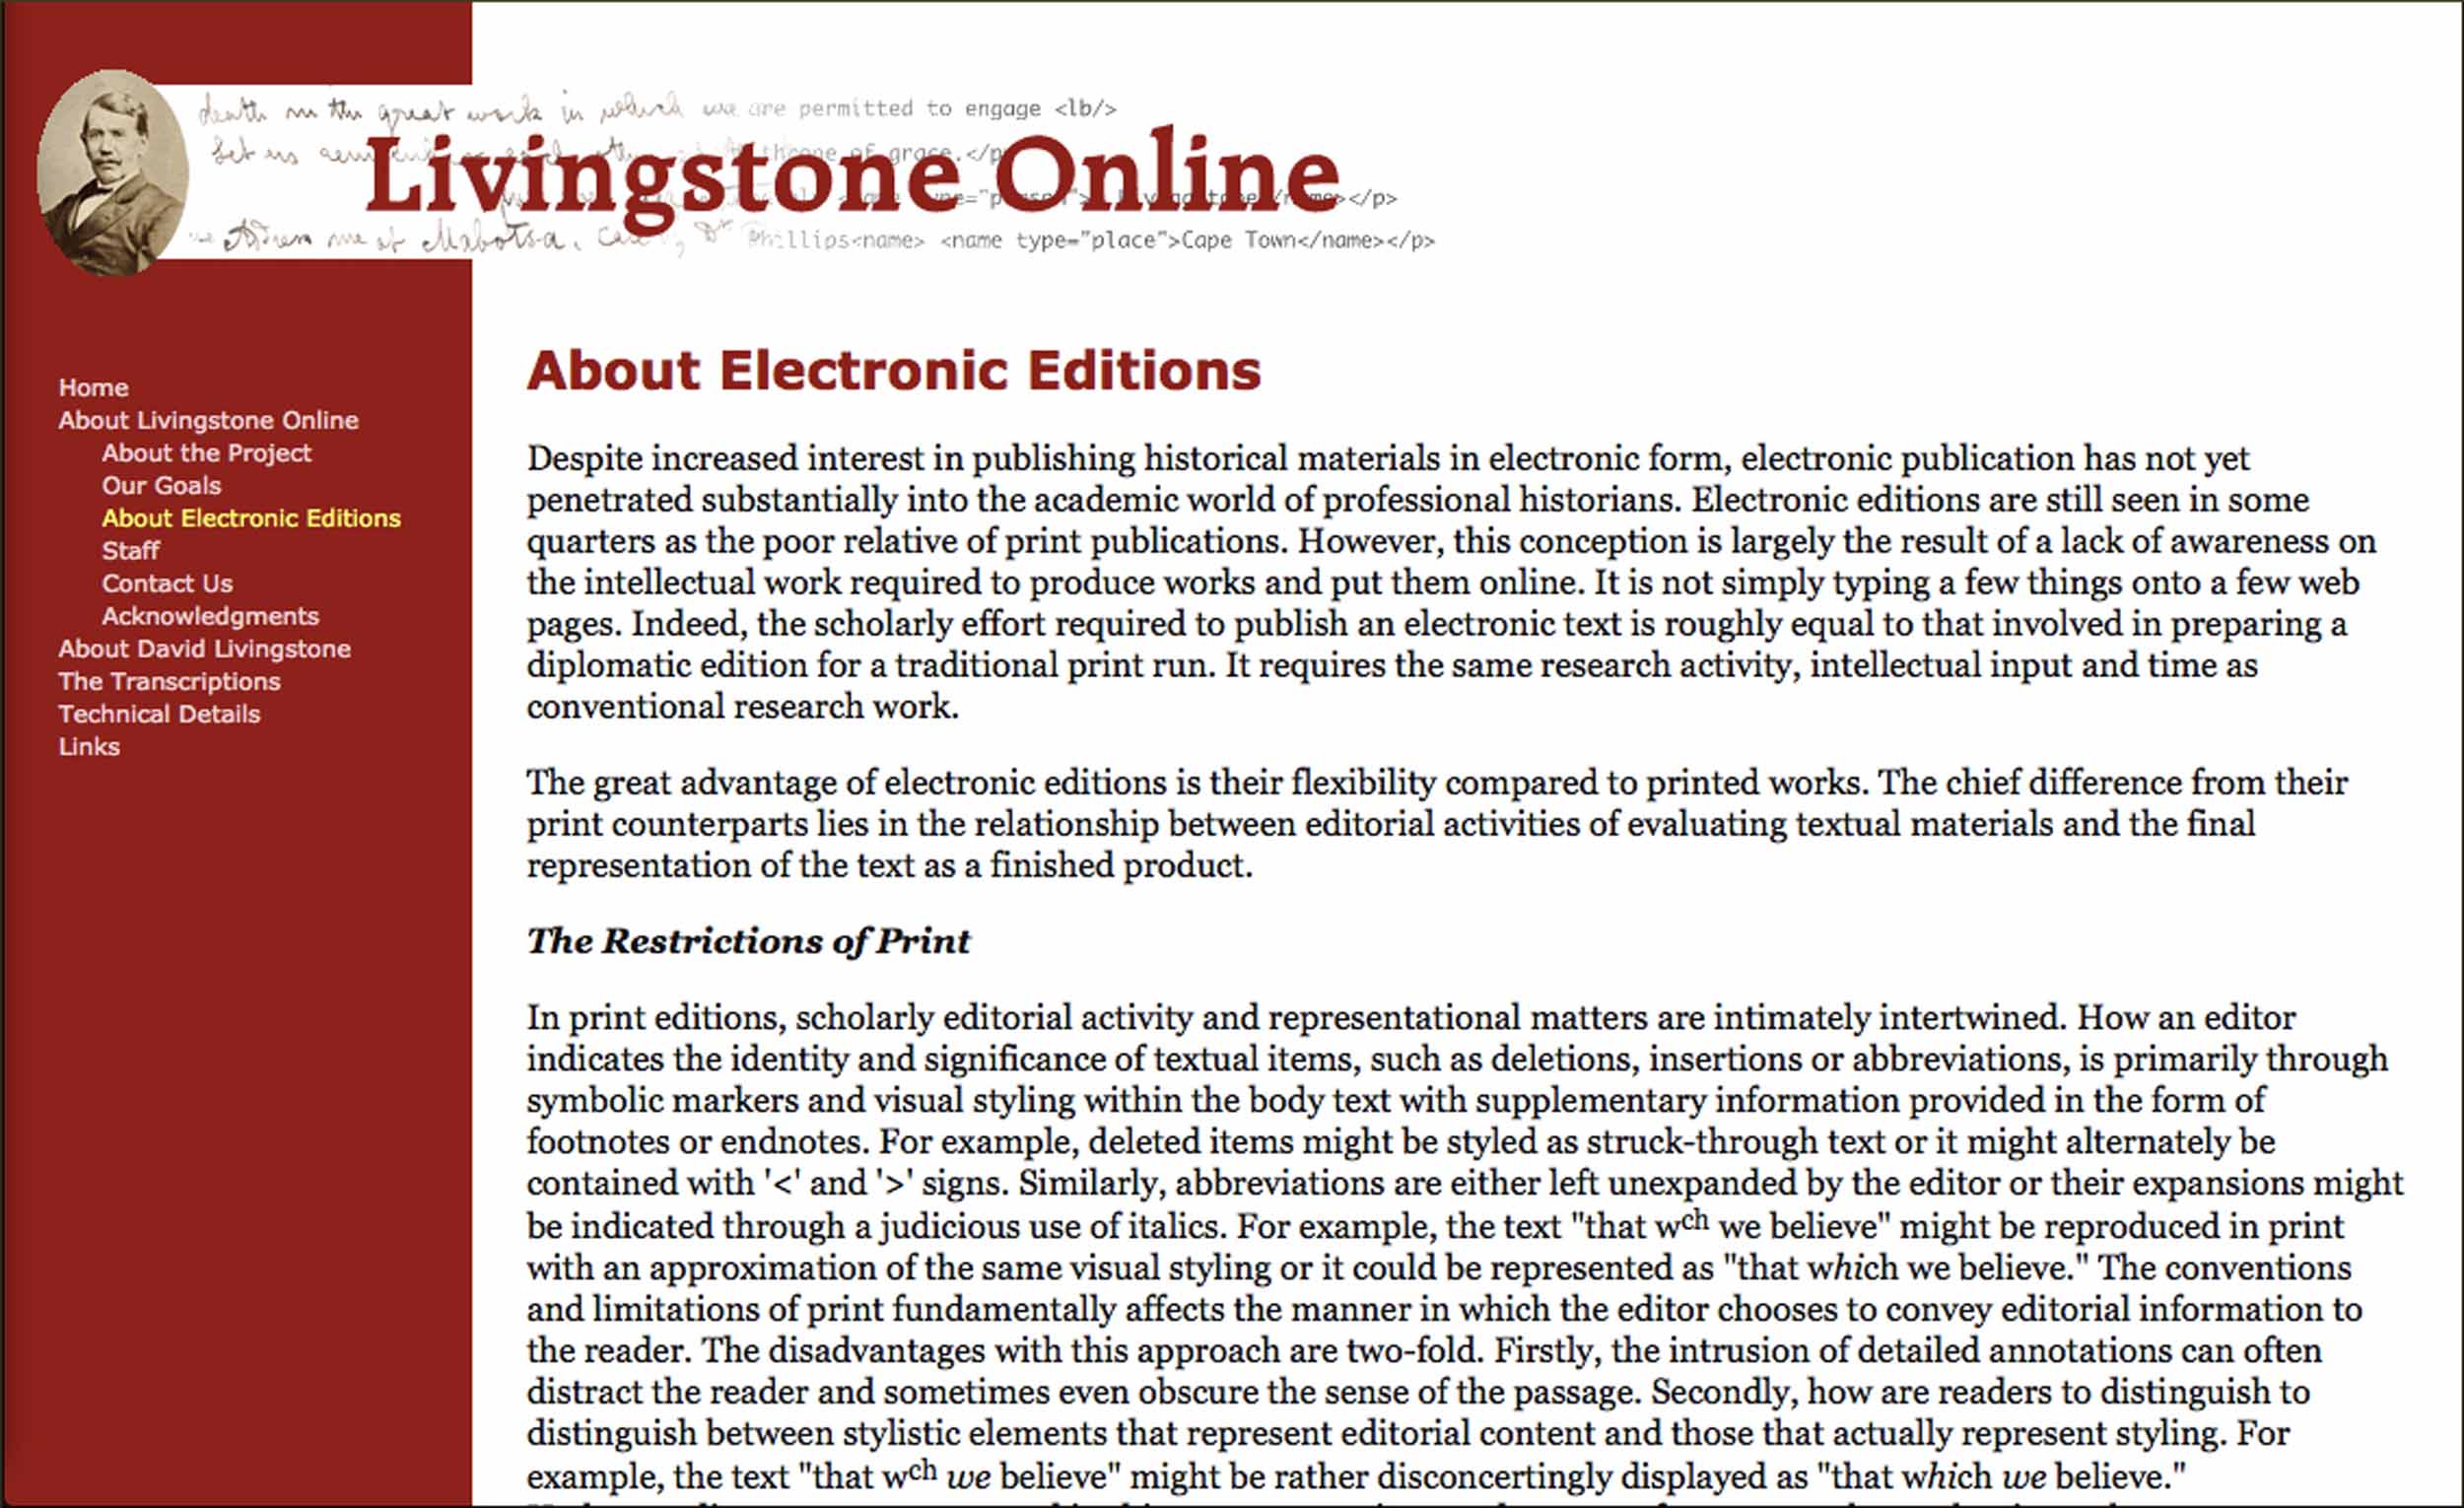 A page of Livingstone Online, circa 2006. Copyright Livingstone Online. Creative Commons Attribution-NonCommercial 3.0 Unported (https://creativecommons.org/licenses/by-nc/3.0/).